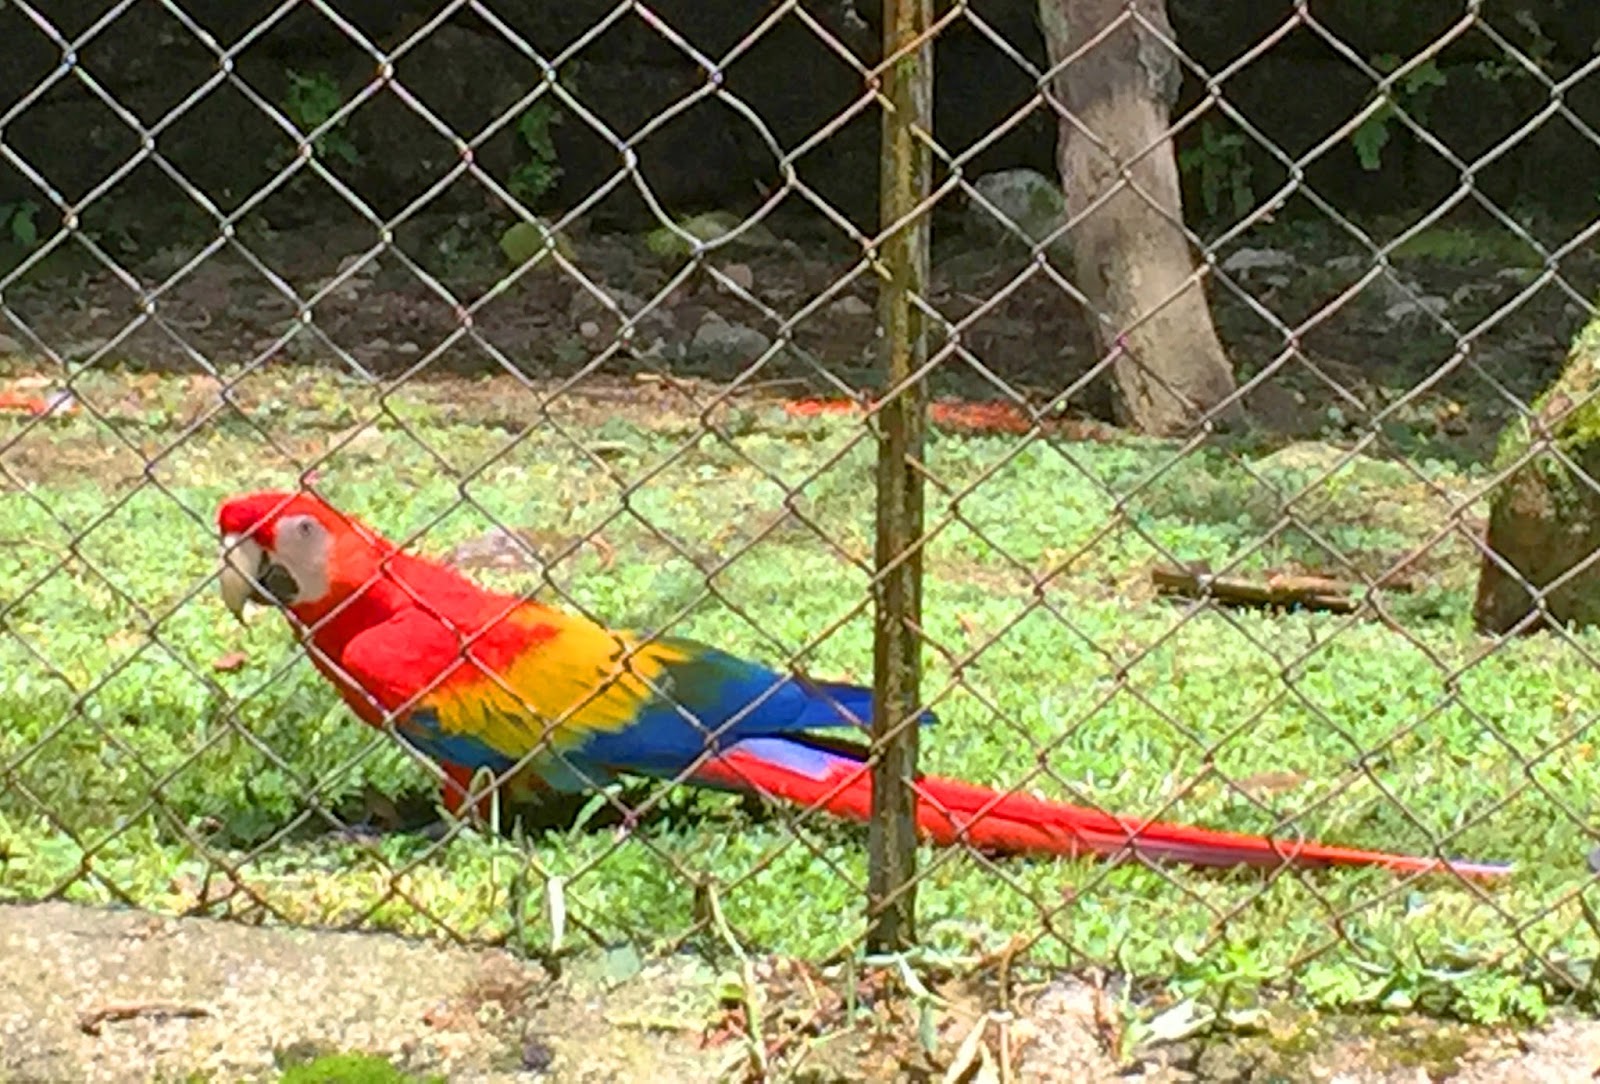 The Guacamaya is one of the most colorful and beautiful birds from Panama!